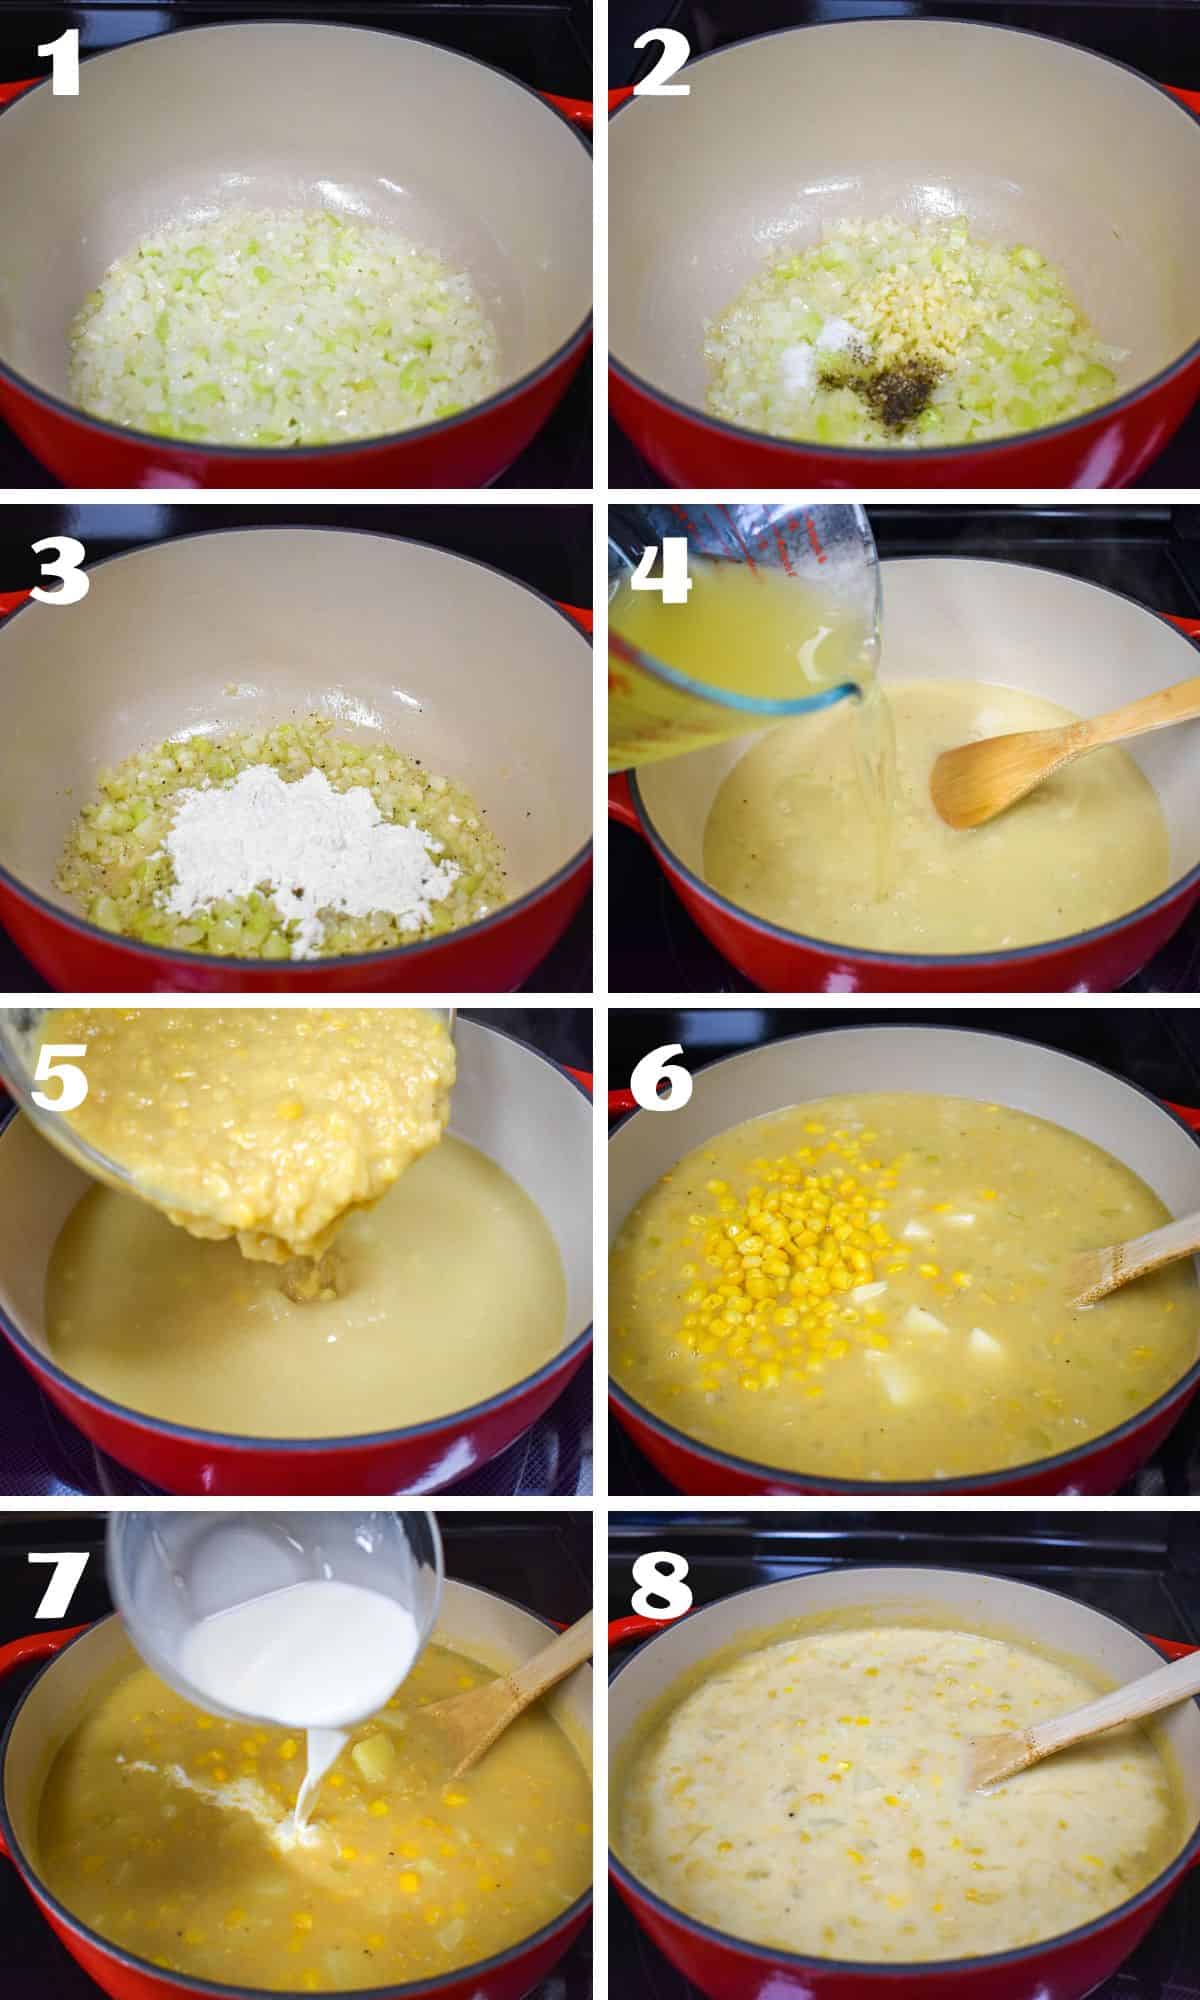 A collage of eight images showing the steps to making the chowder.